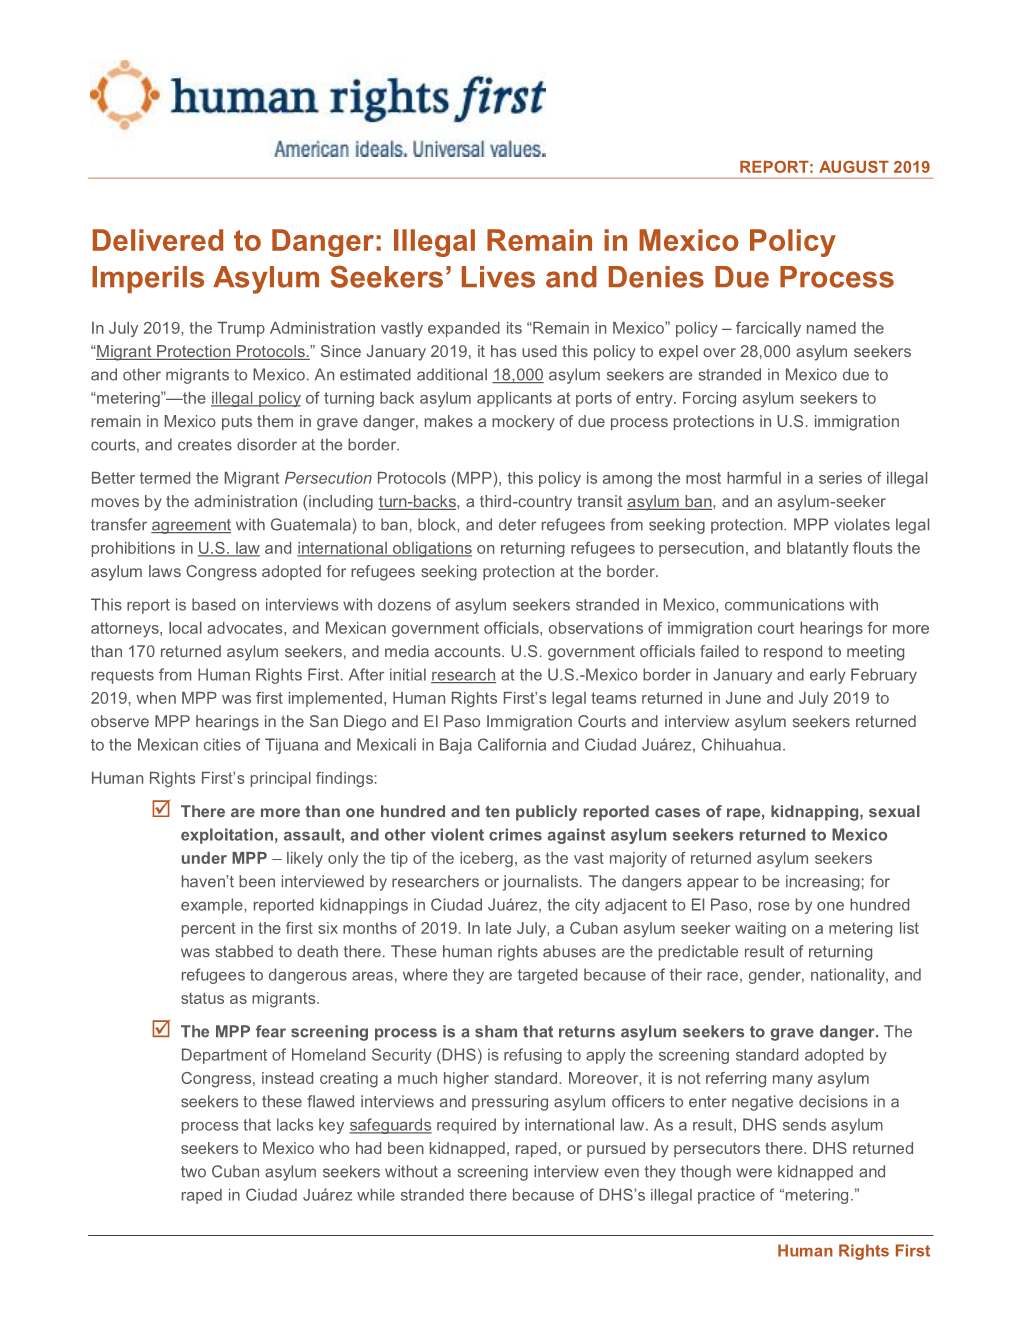 Delivered to Danger: Illegal Remain in Mexico Policy Imperils Asylum Seekers’ Lives and Denies Due Process